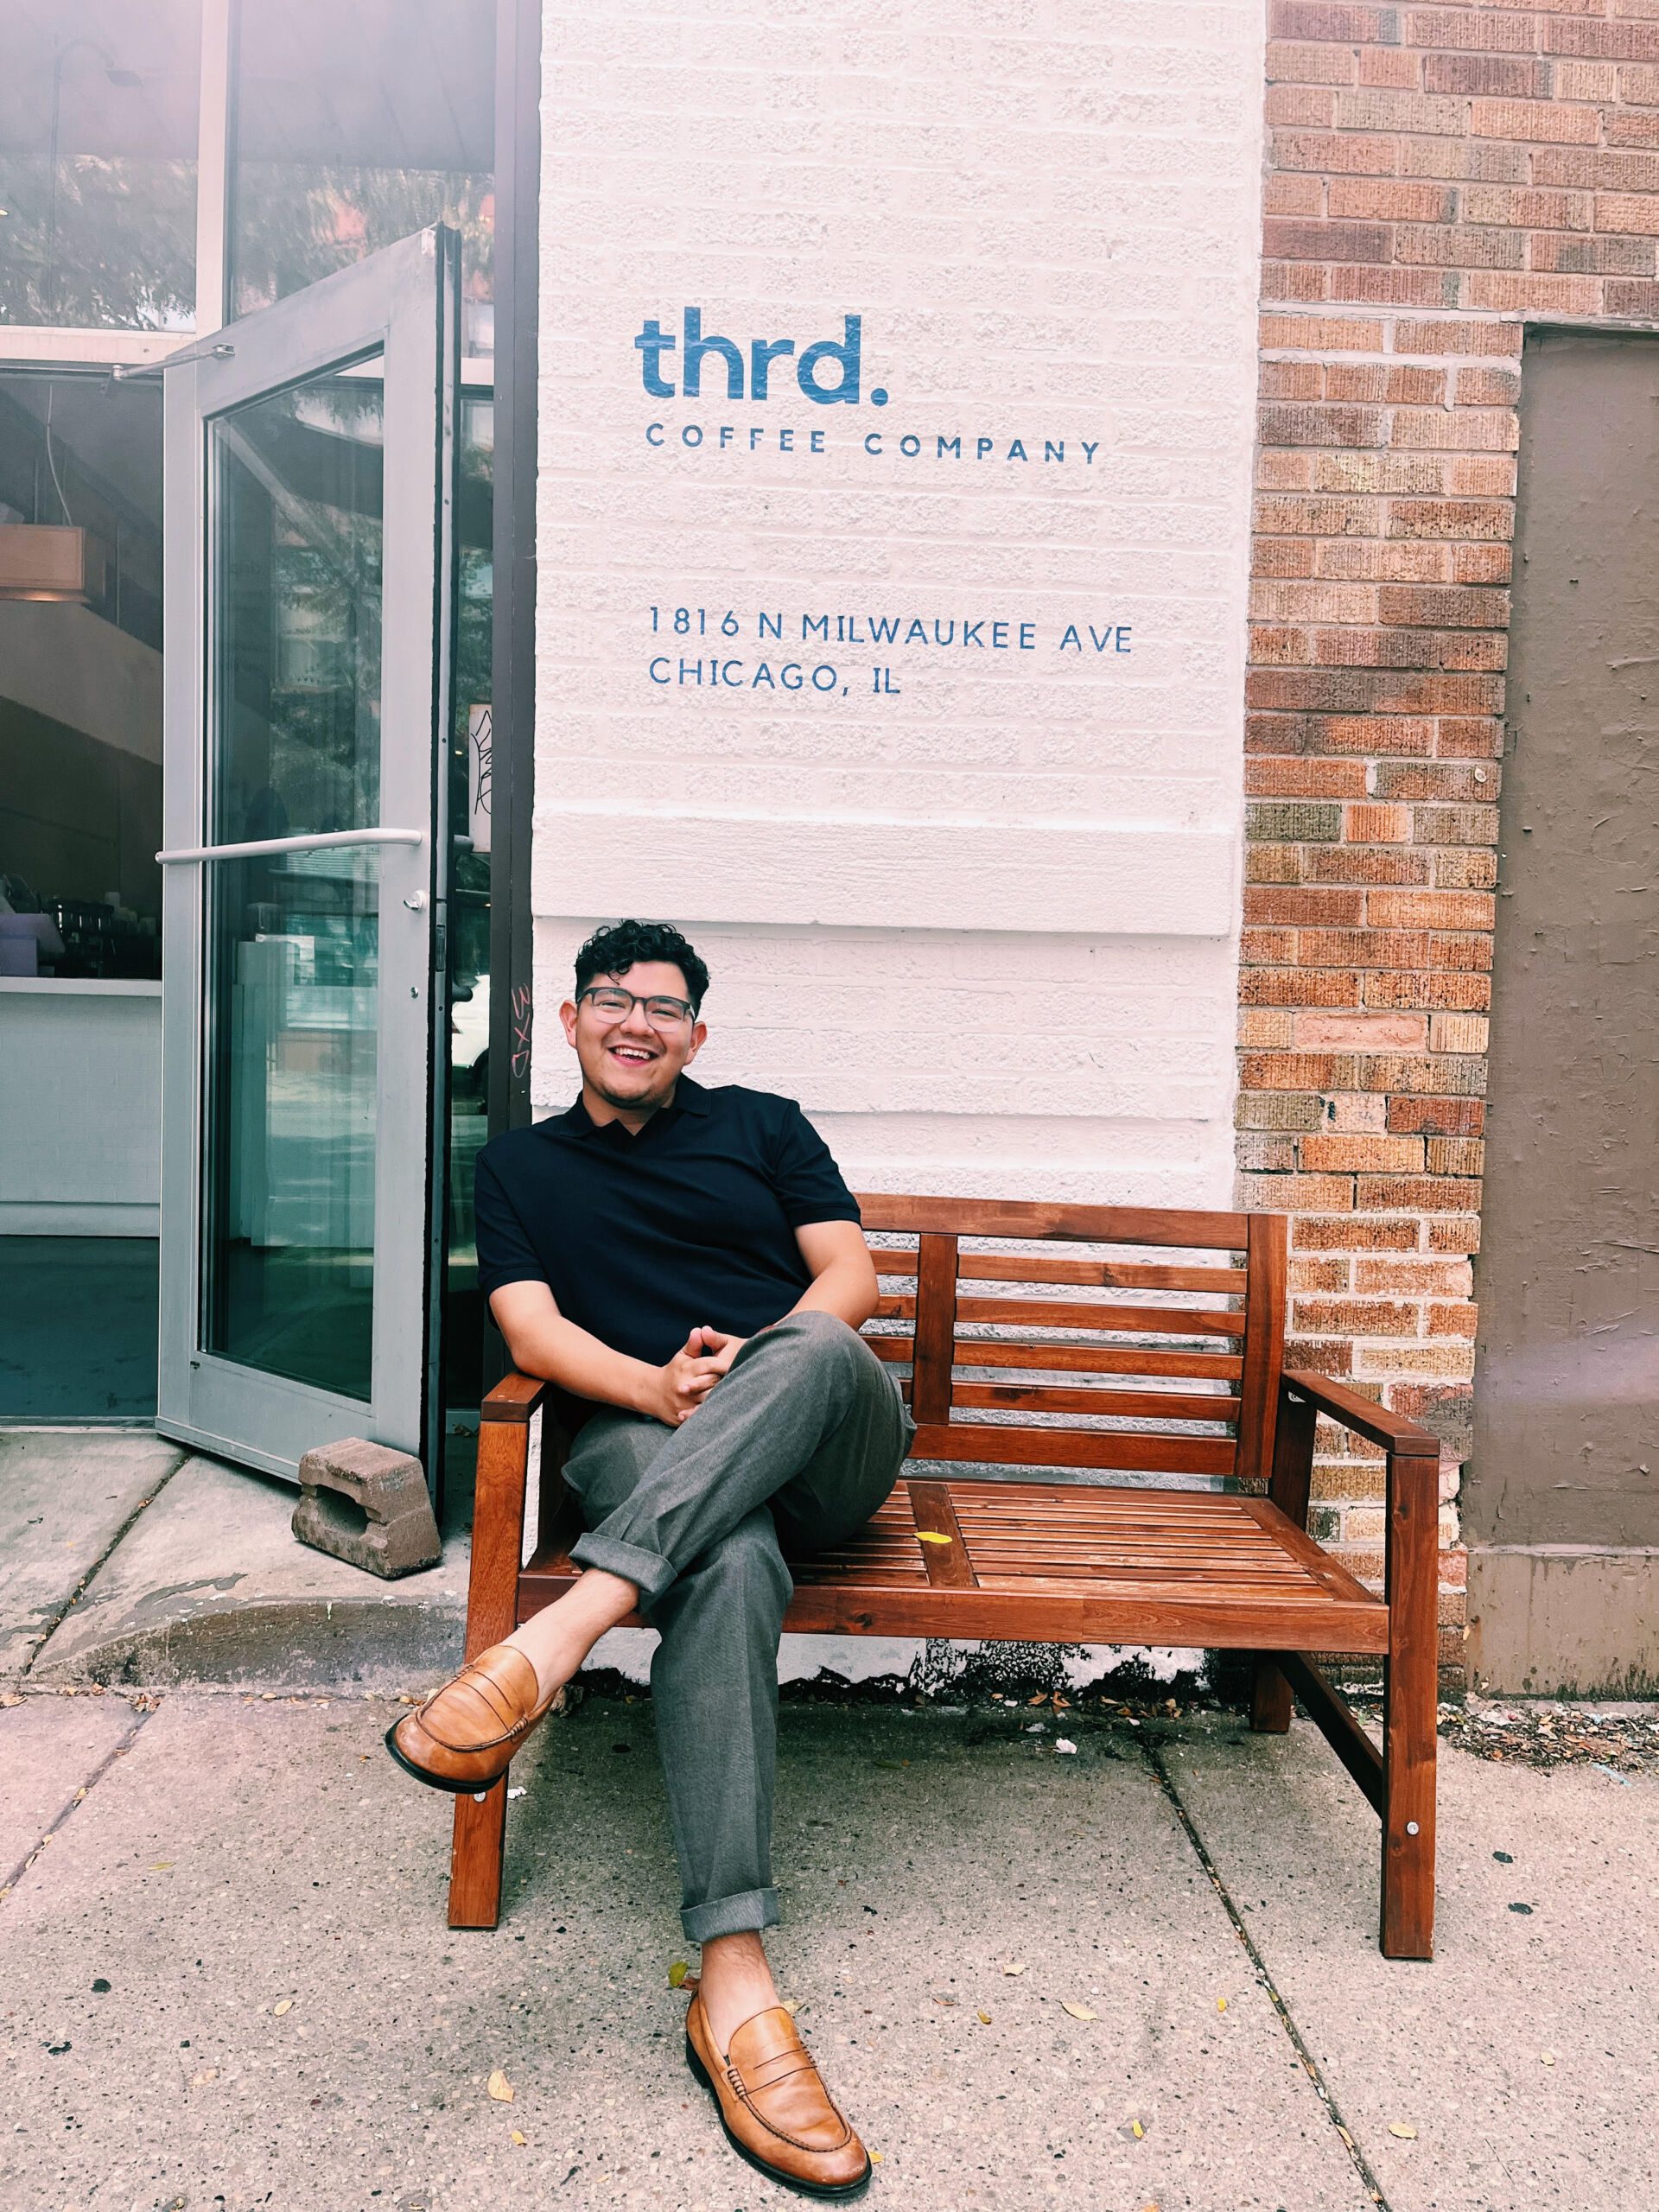 Image shows Raoul Adwan, a UIC College Prep alum, sitting on a bench in front of his coffee shop location, Thrd Coffee Company.